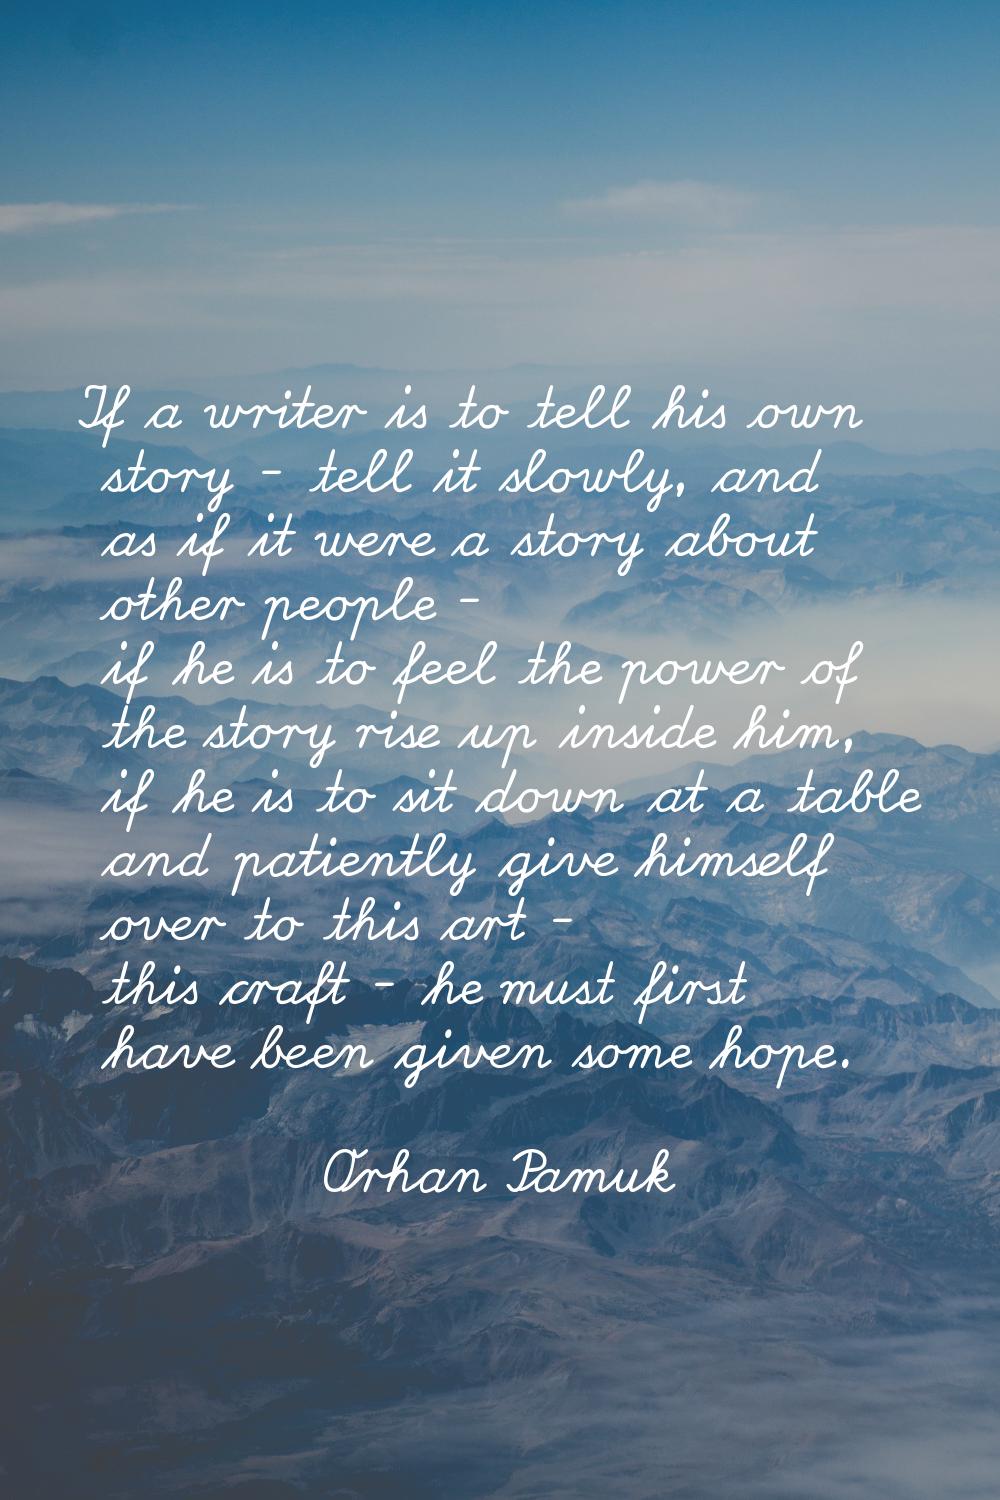 If a writer is to tell his own story - tell it slowly, and as if it were a story about other people